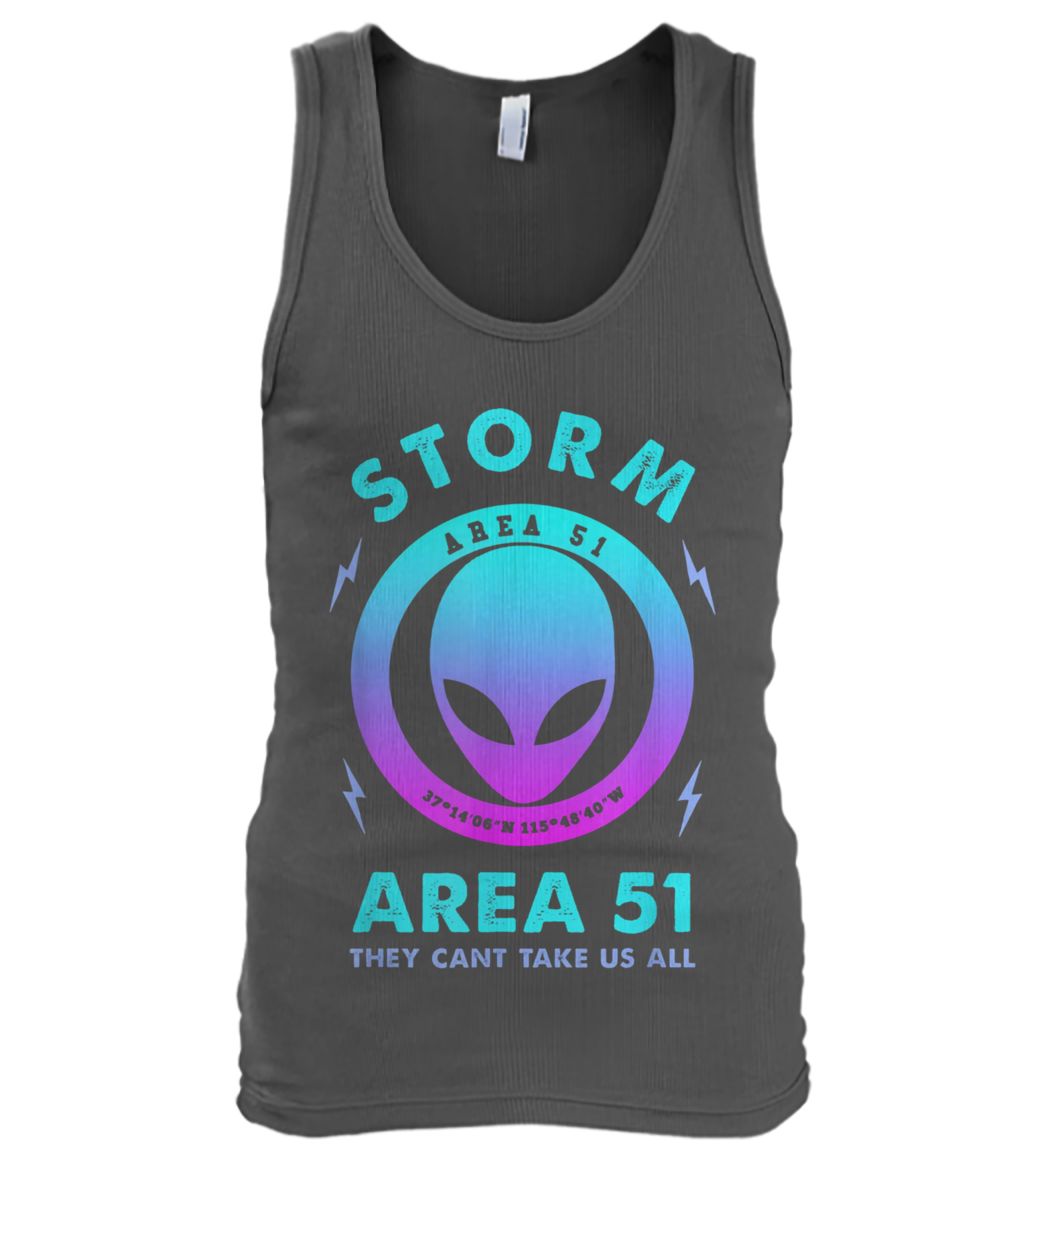 Storm area 51 alien they can't stop all us men's tank top